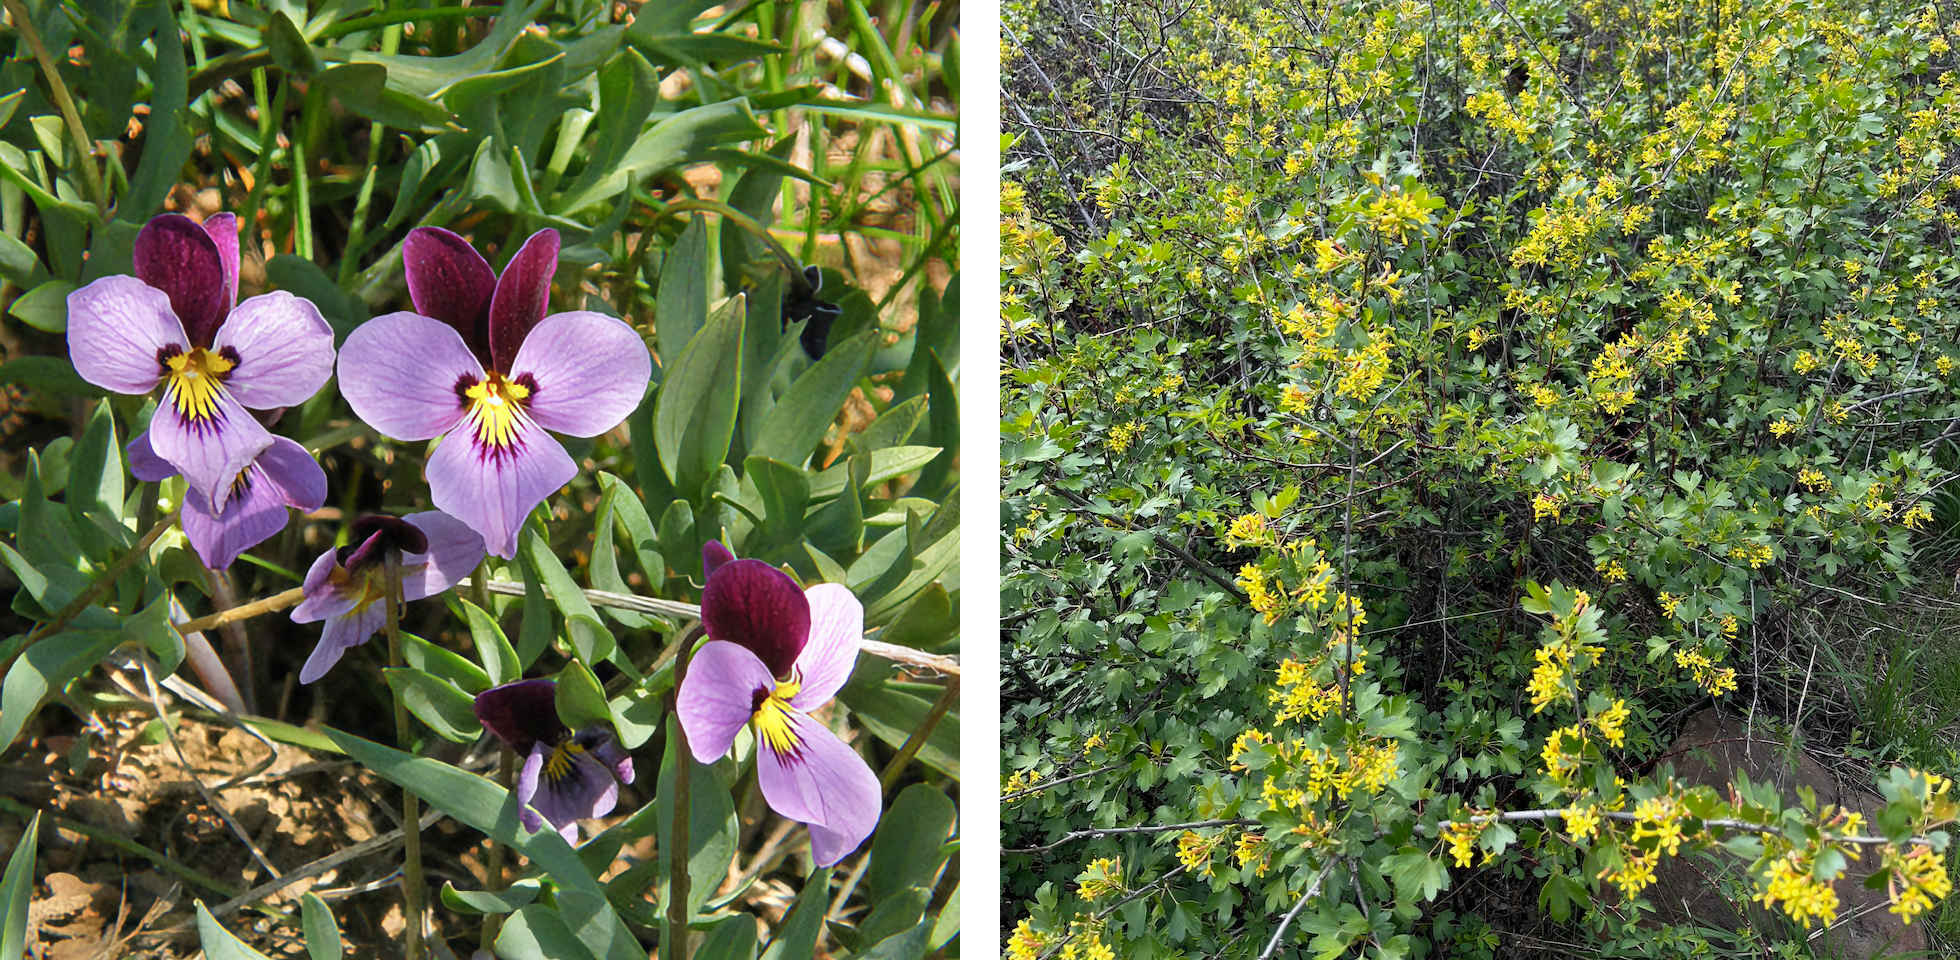 Two-photo montage, with e small violets on left, and a green shrub with yellow blossoms on right.